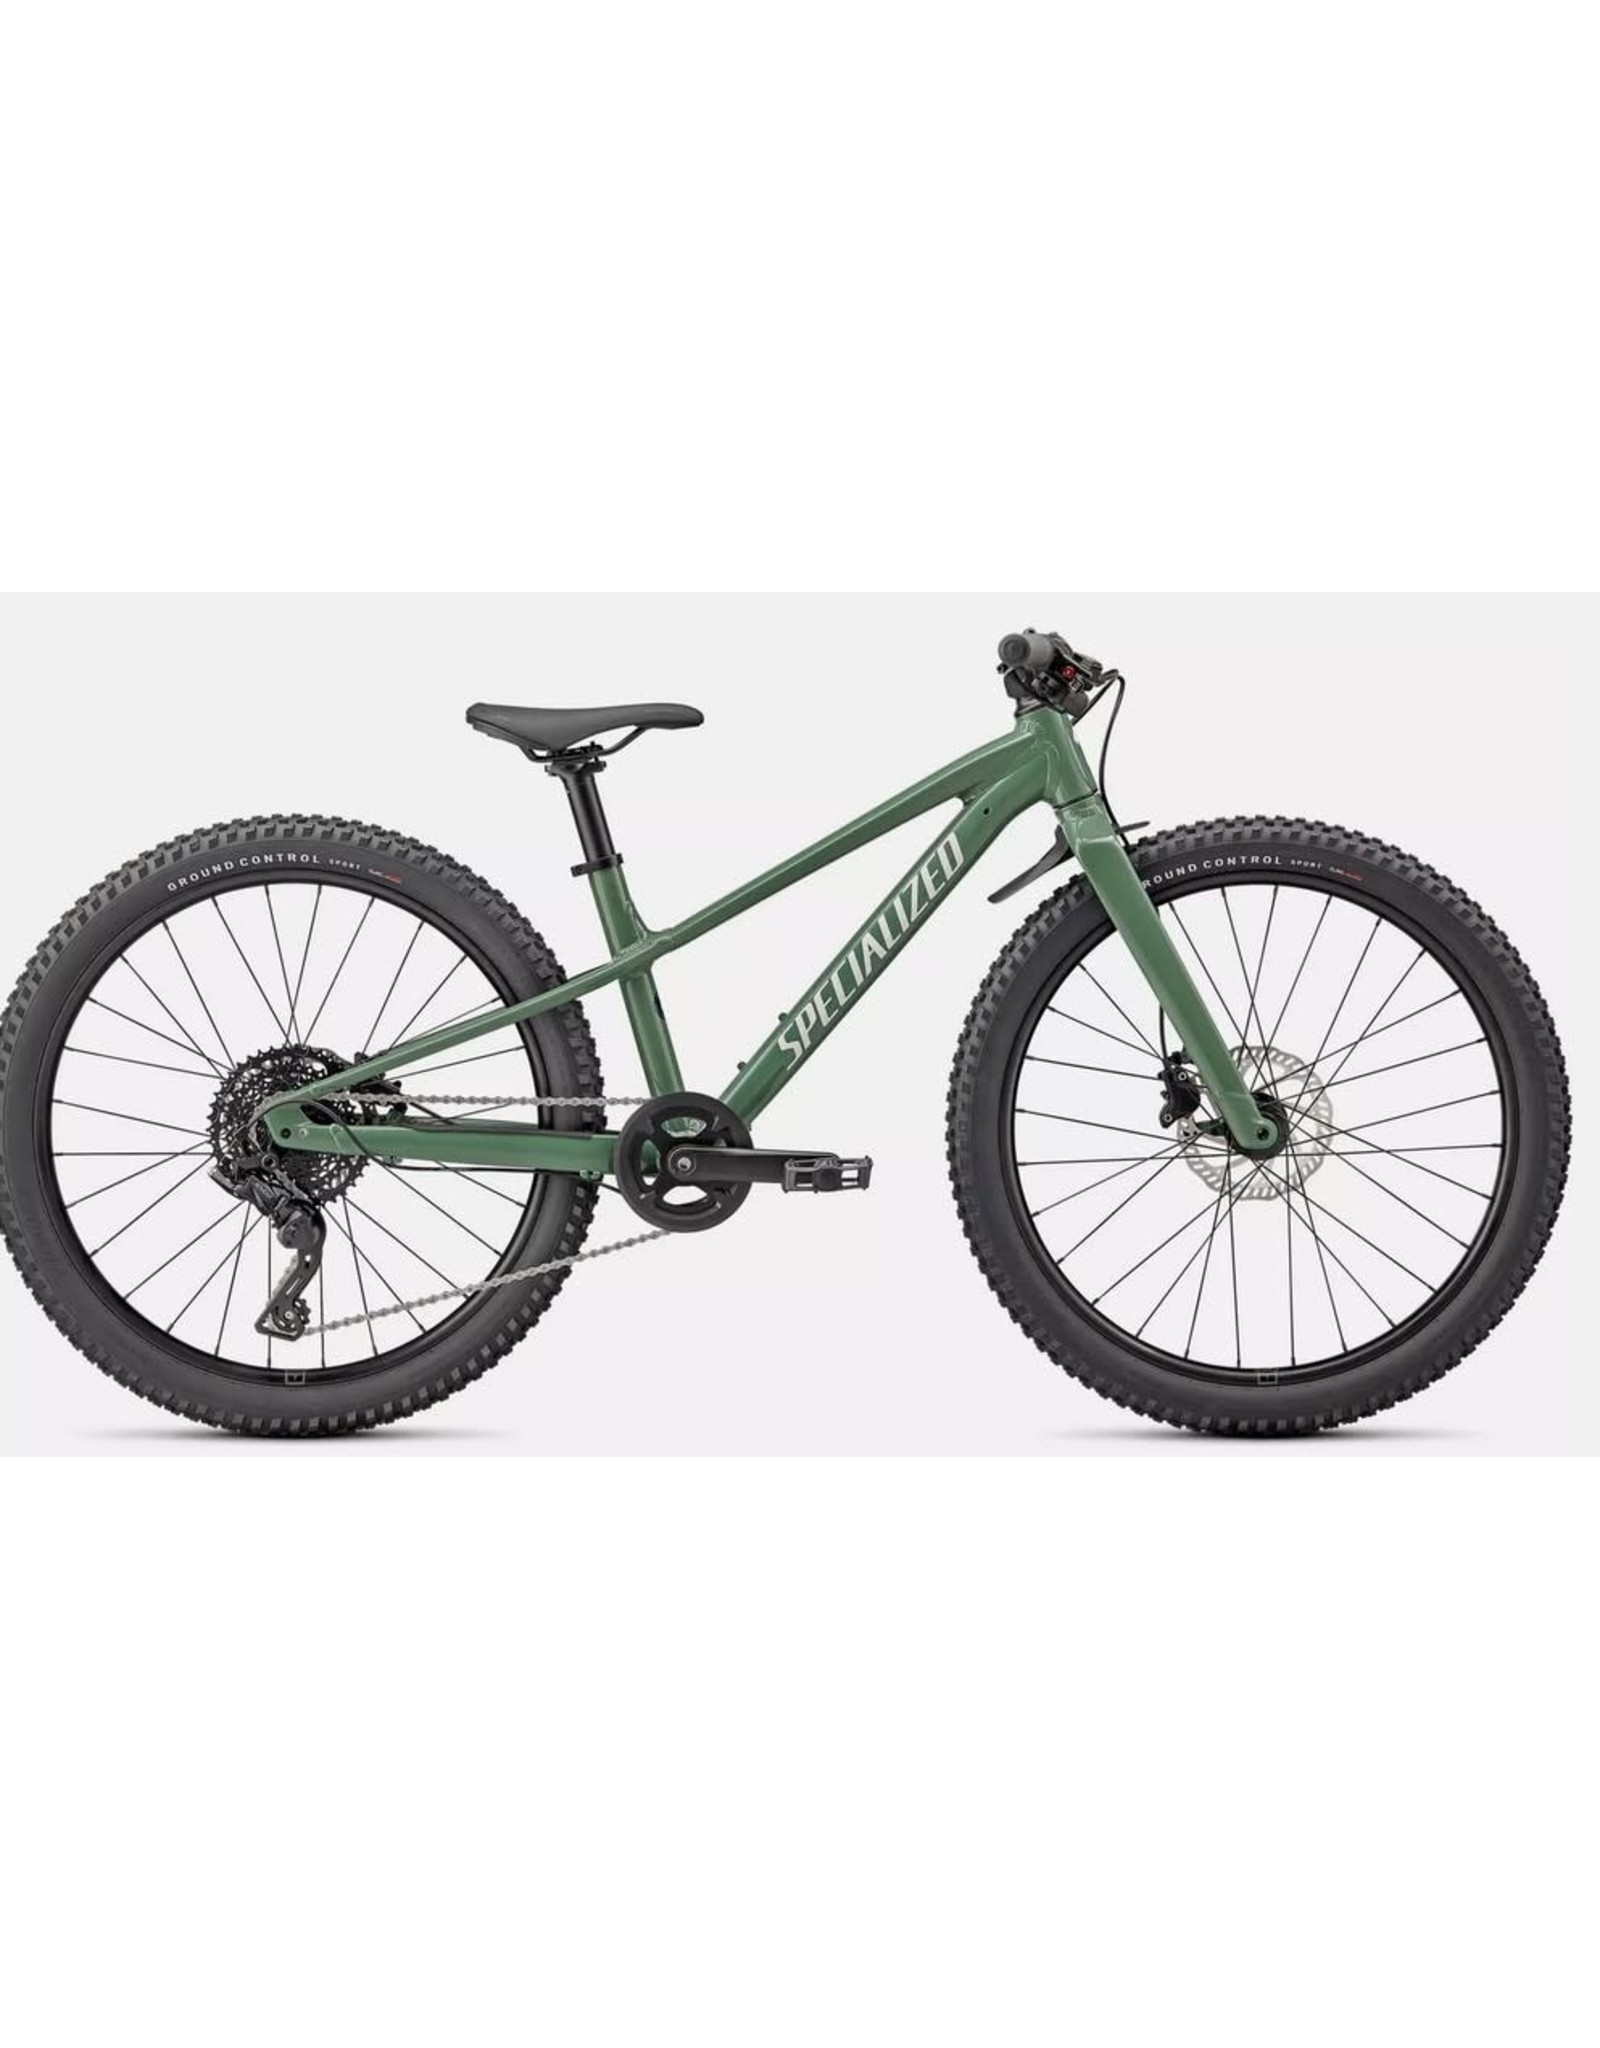 SPECIALIZED RIPROCK 24 - Sage Green/White